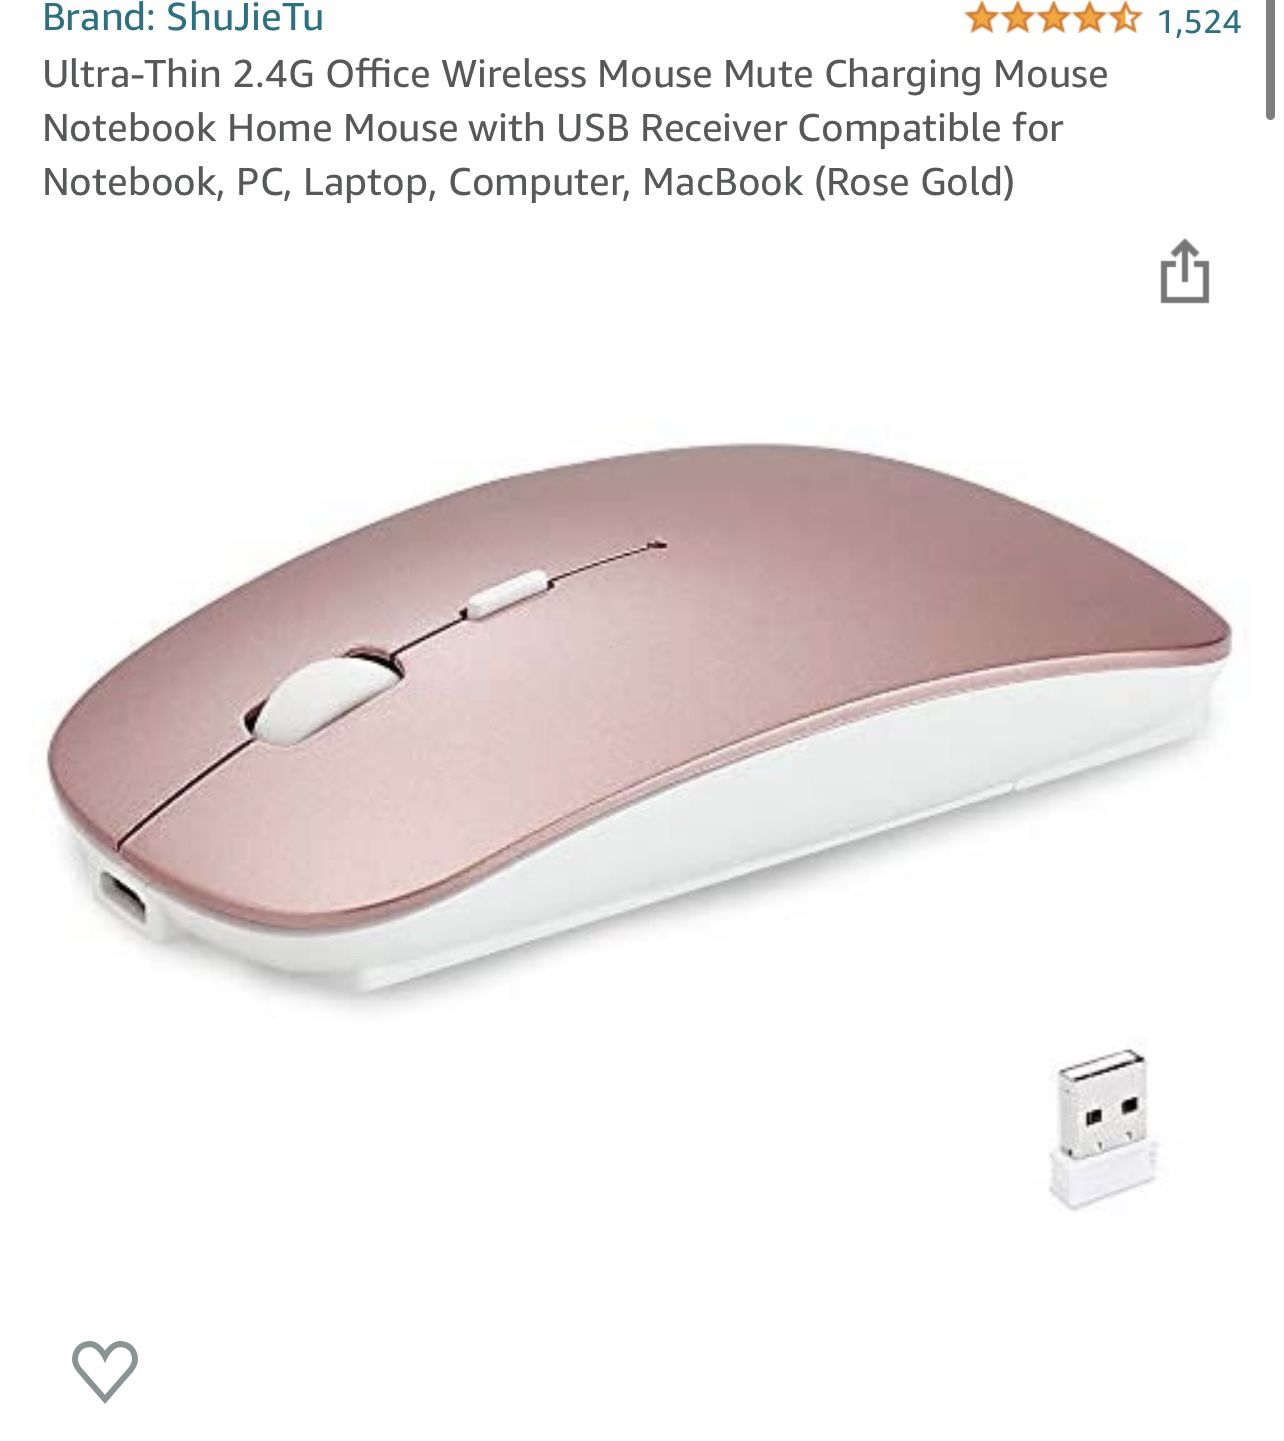 Ultra-Thin 2.4G Office Wireless Mouse Mute Charging Mouse